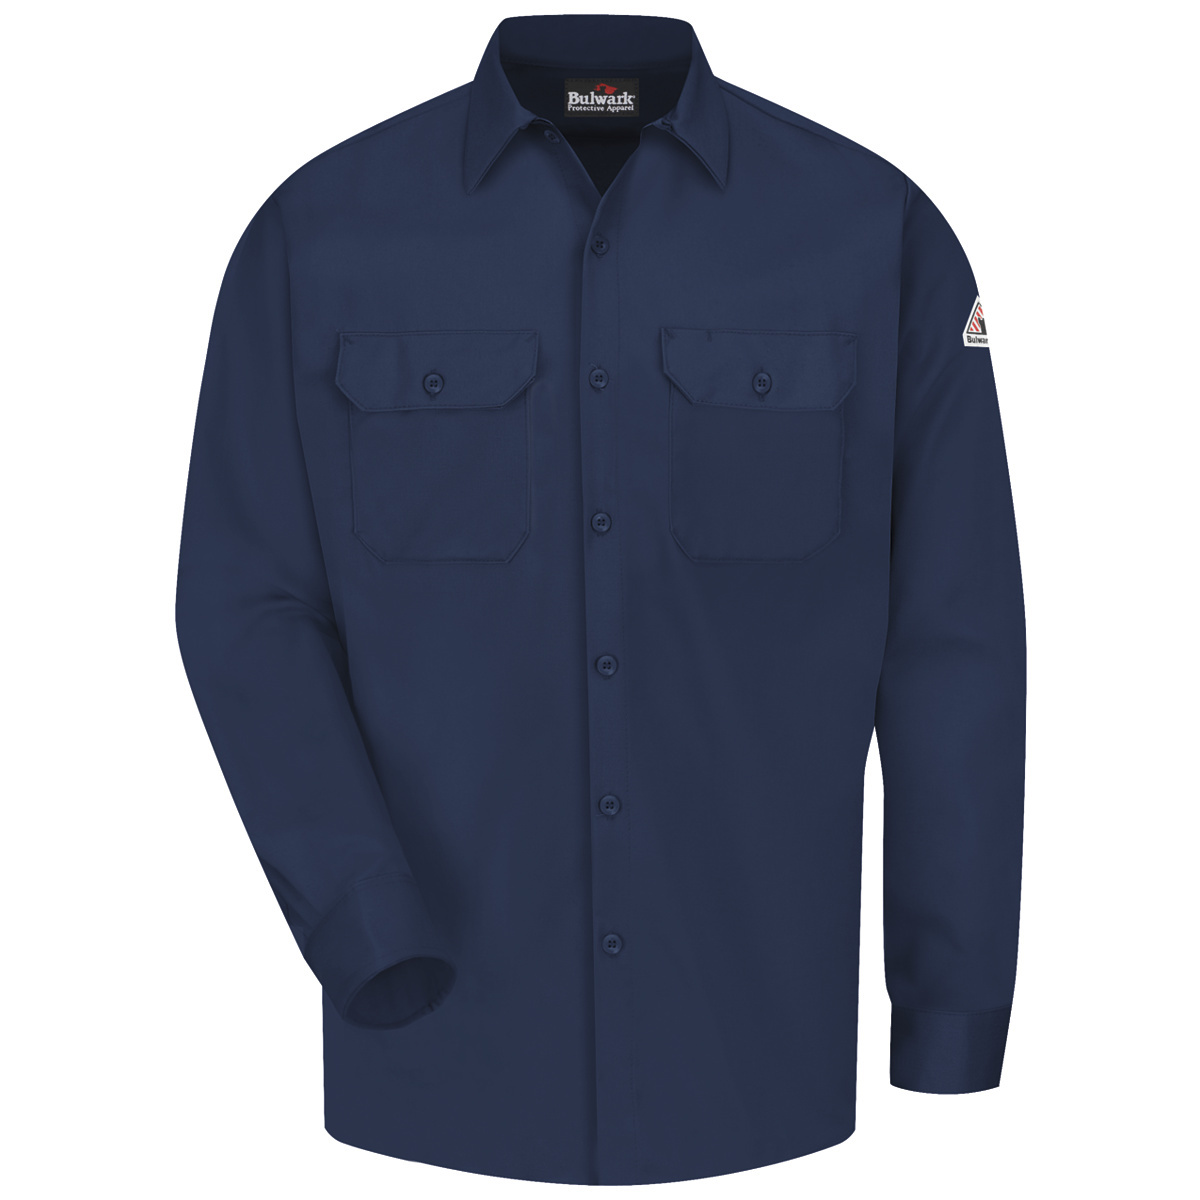 Bulwark® 6X Regular Navy Blue Westex Ultrasoft®/Cotton/Nylon Flame Resistant Work Shirt With Button Front Closure